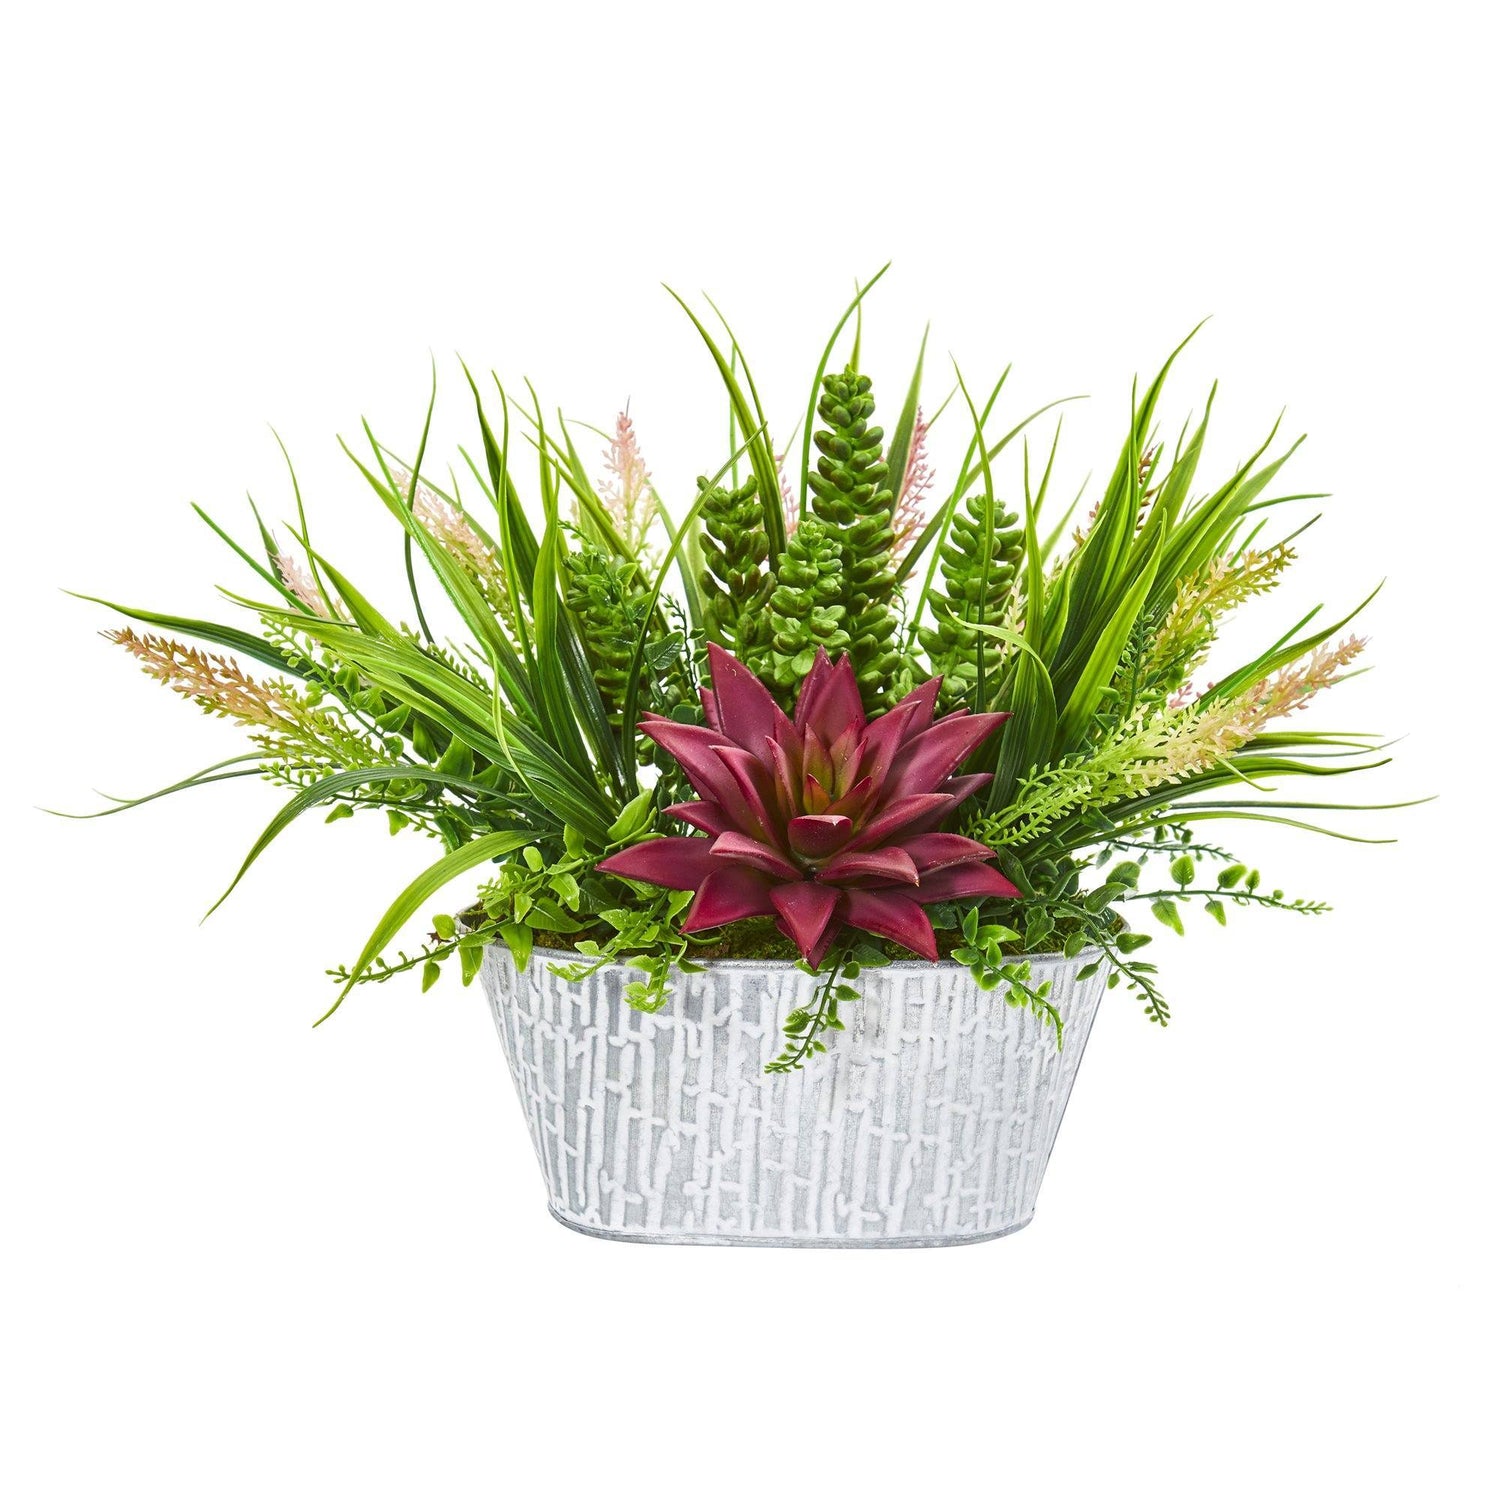 10” Succulent and Grass Artificial Plant in White Tin Planter